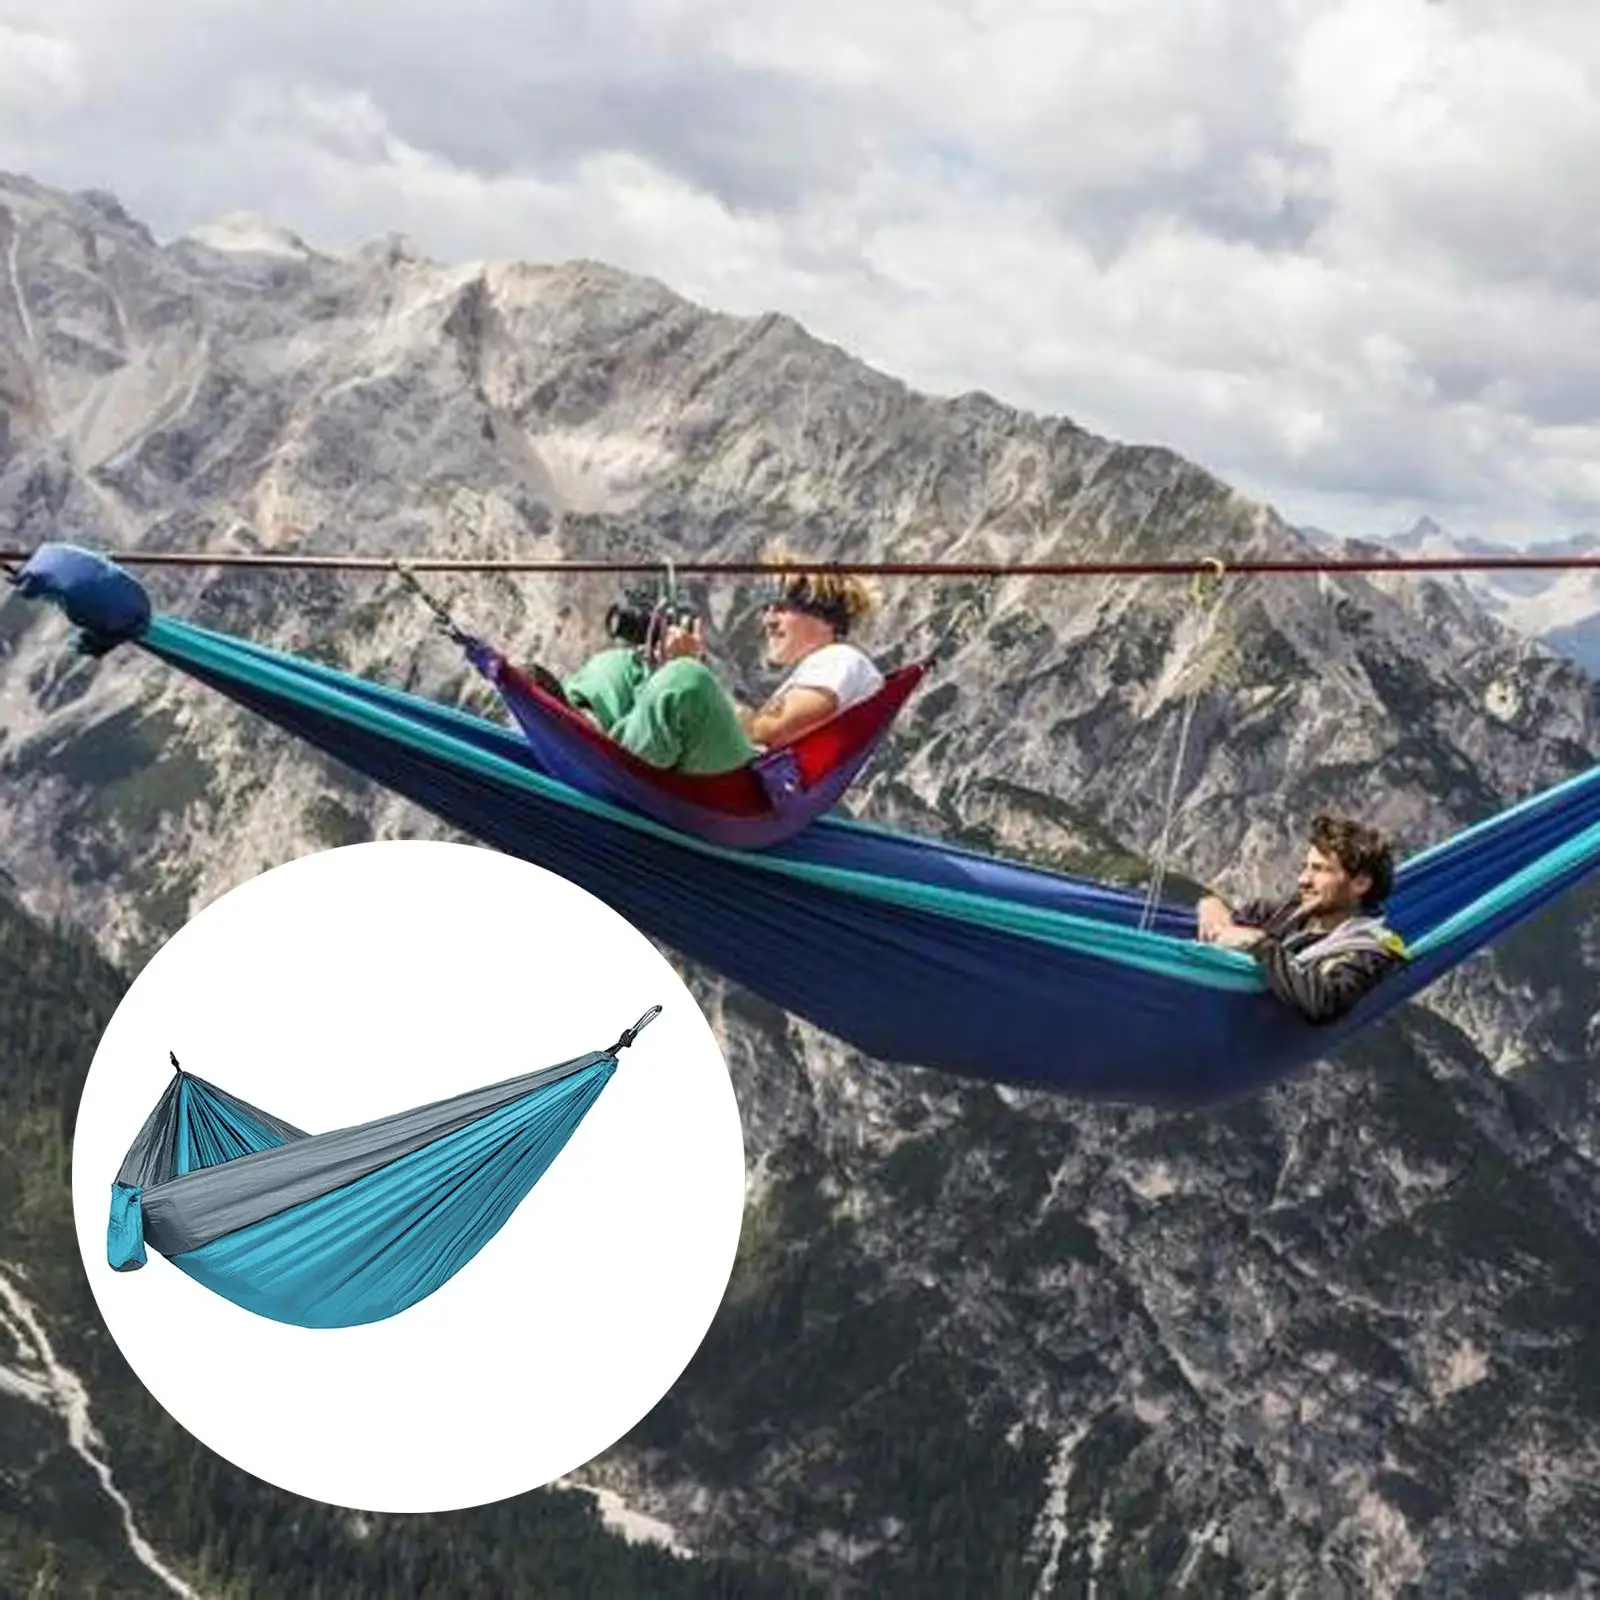 Travel Camping Hammock   Fabric Double Swing Bed for Outdoor